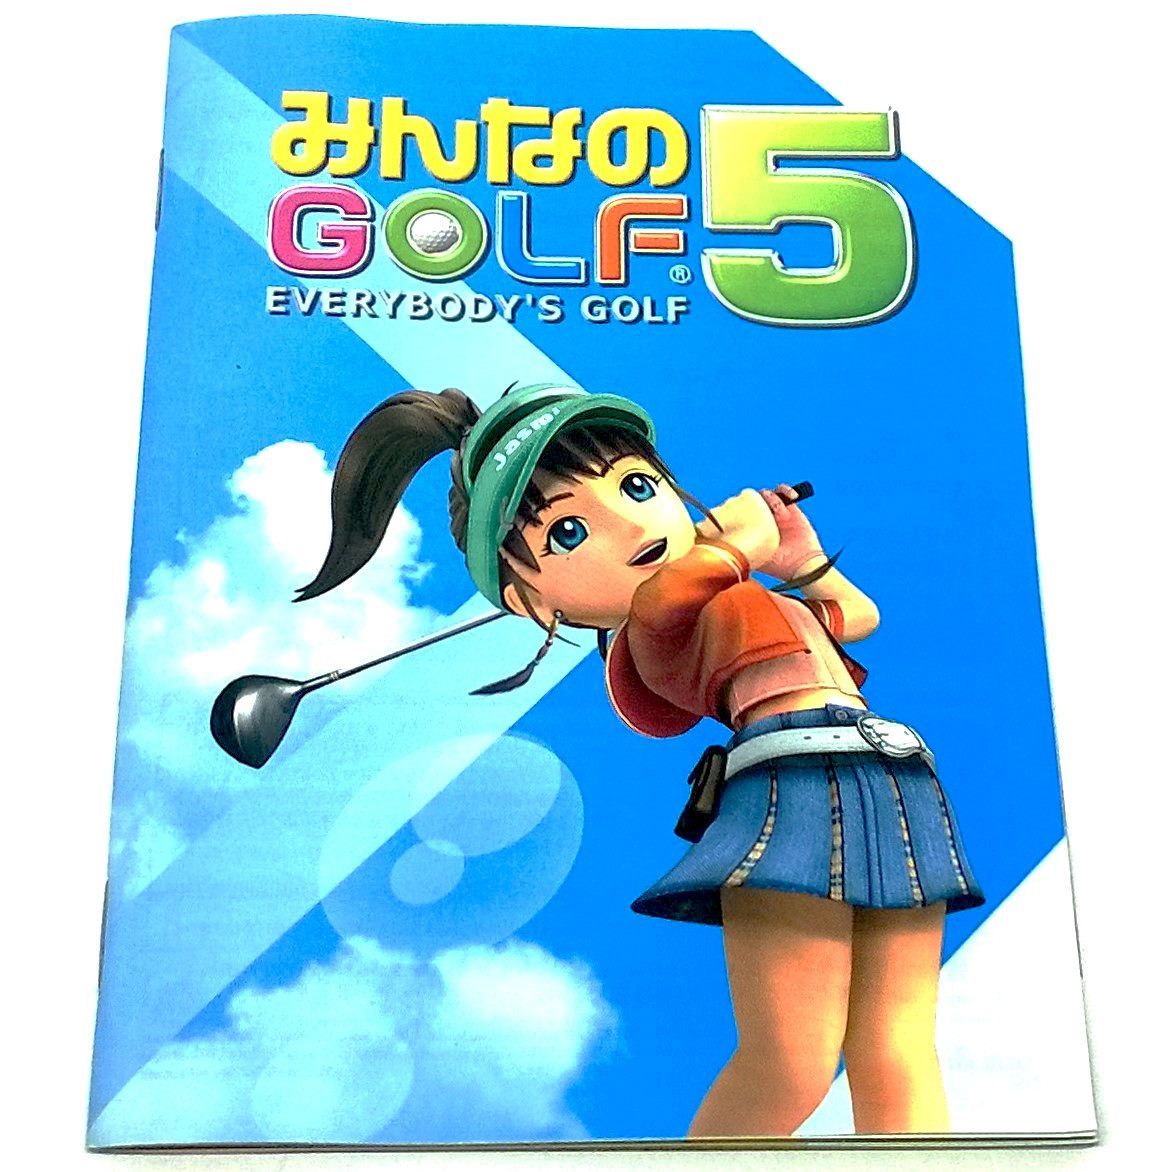 Minna no Golf 5 for PlayStation 3 (import) - Front of manual